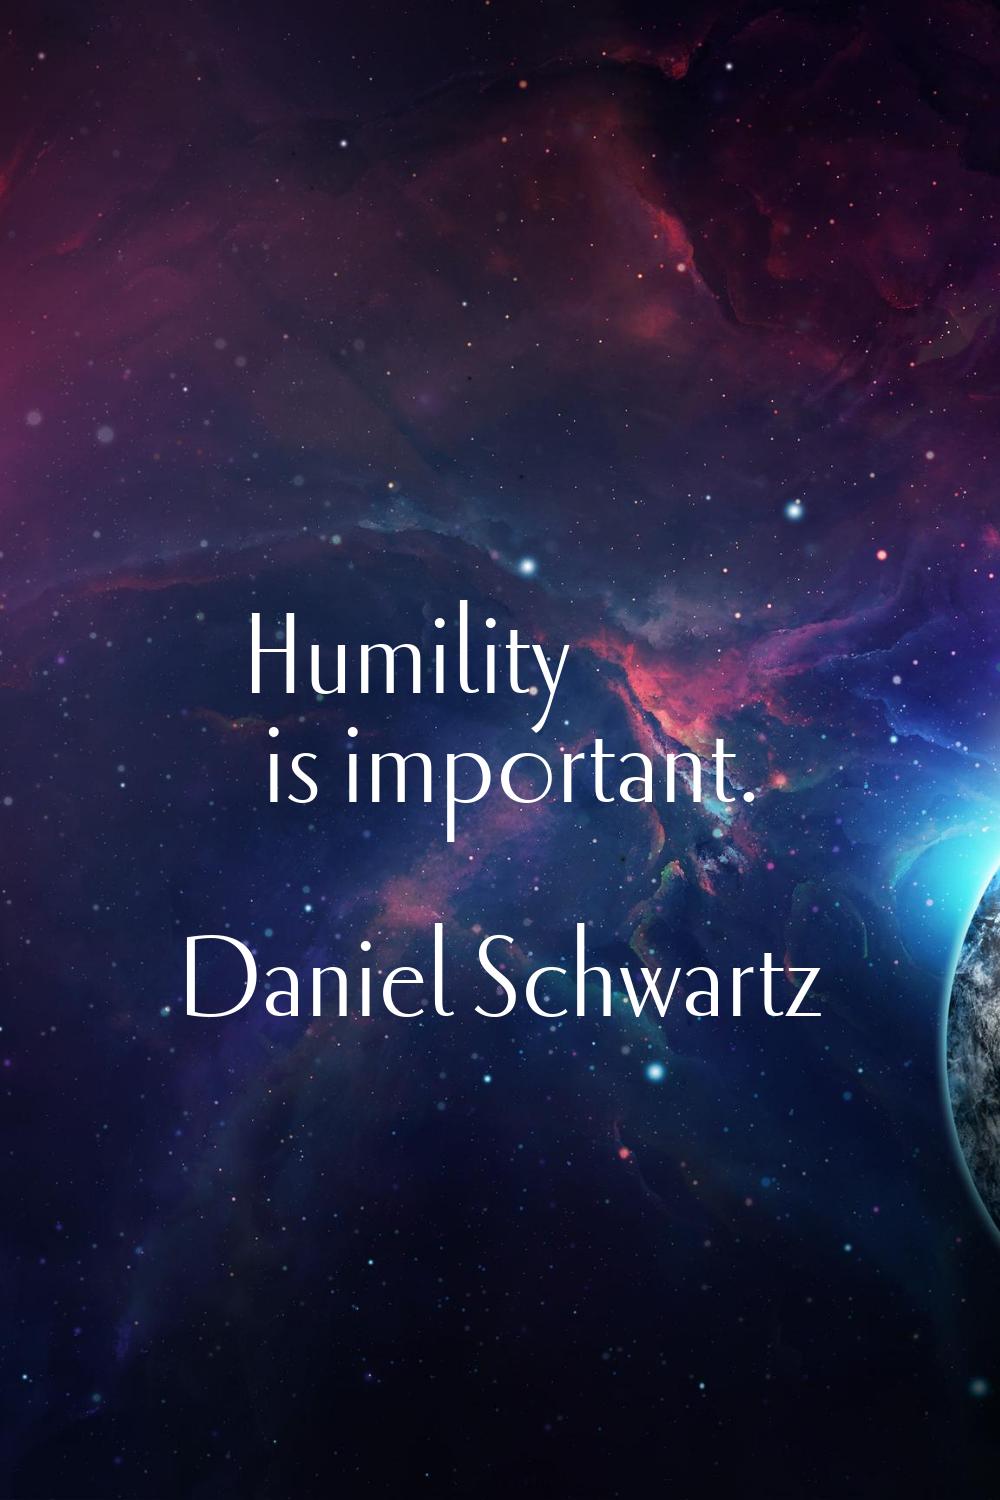 Humility is important.